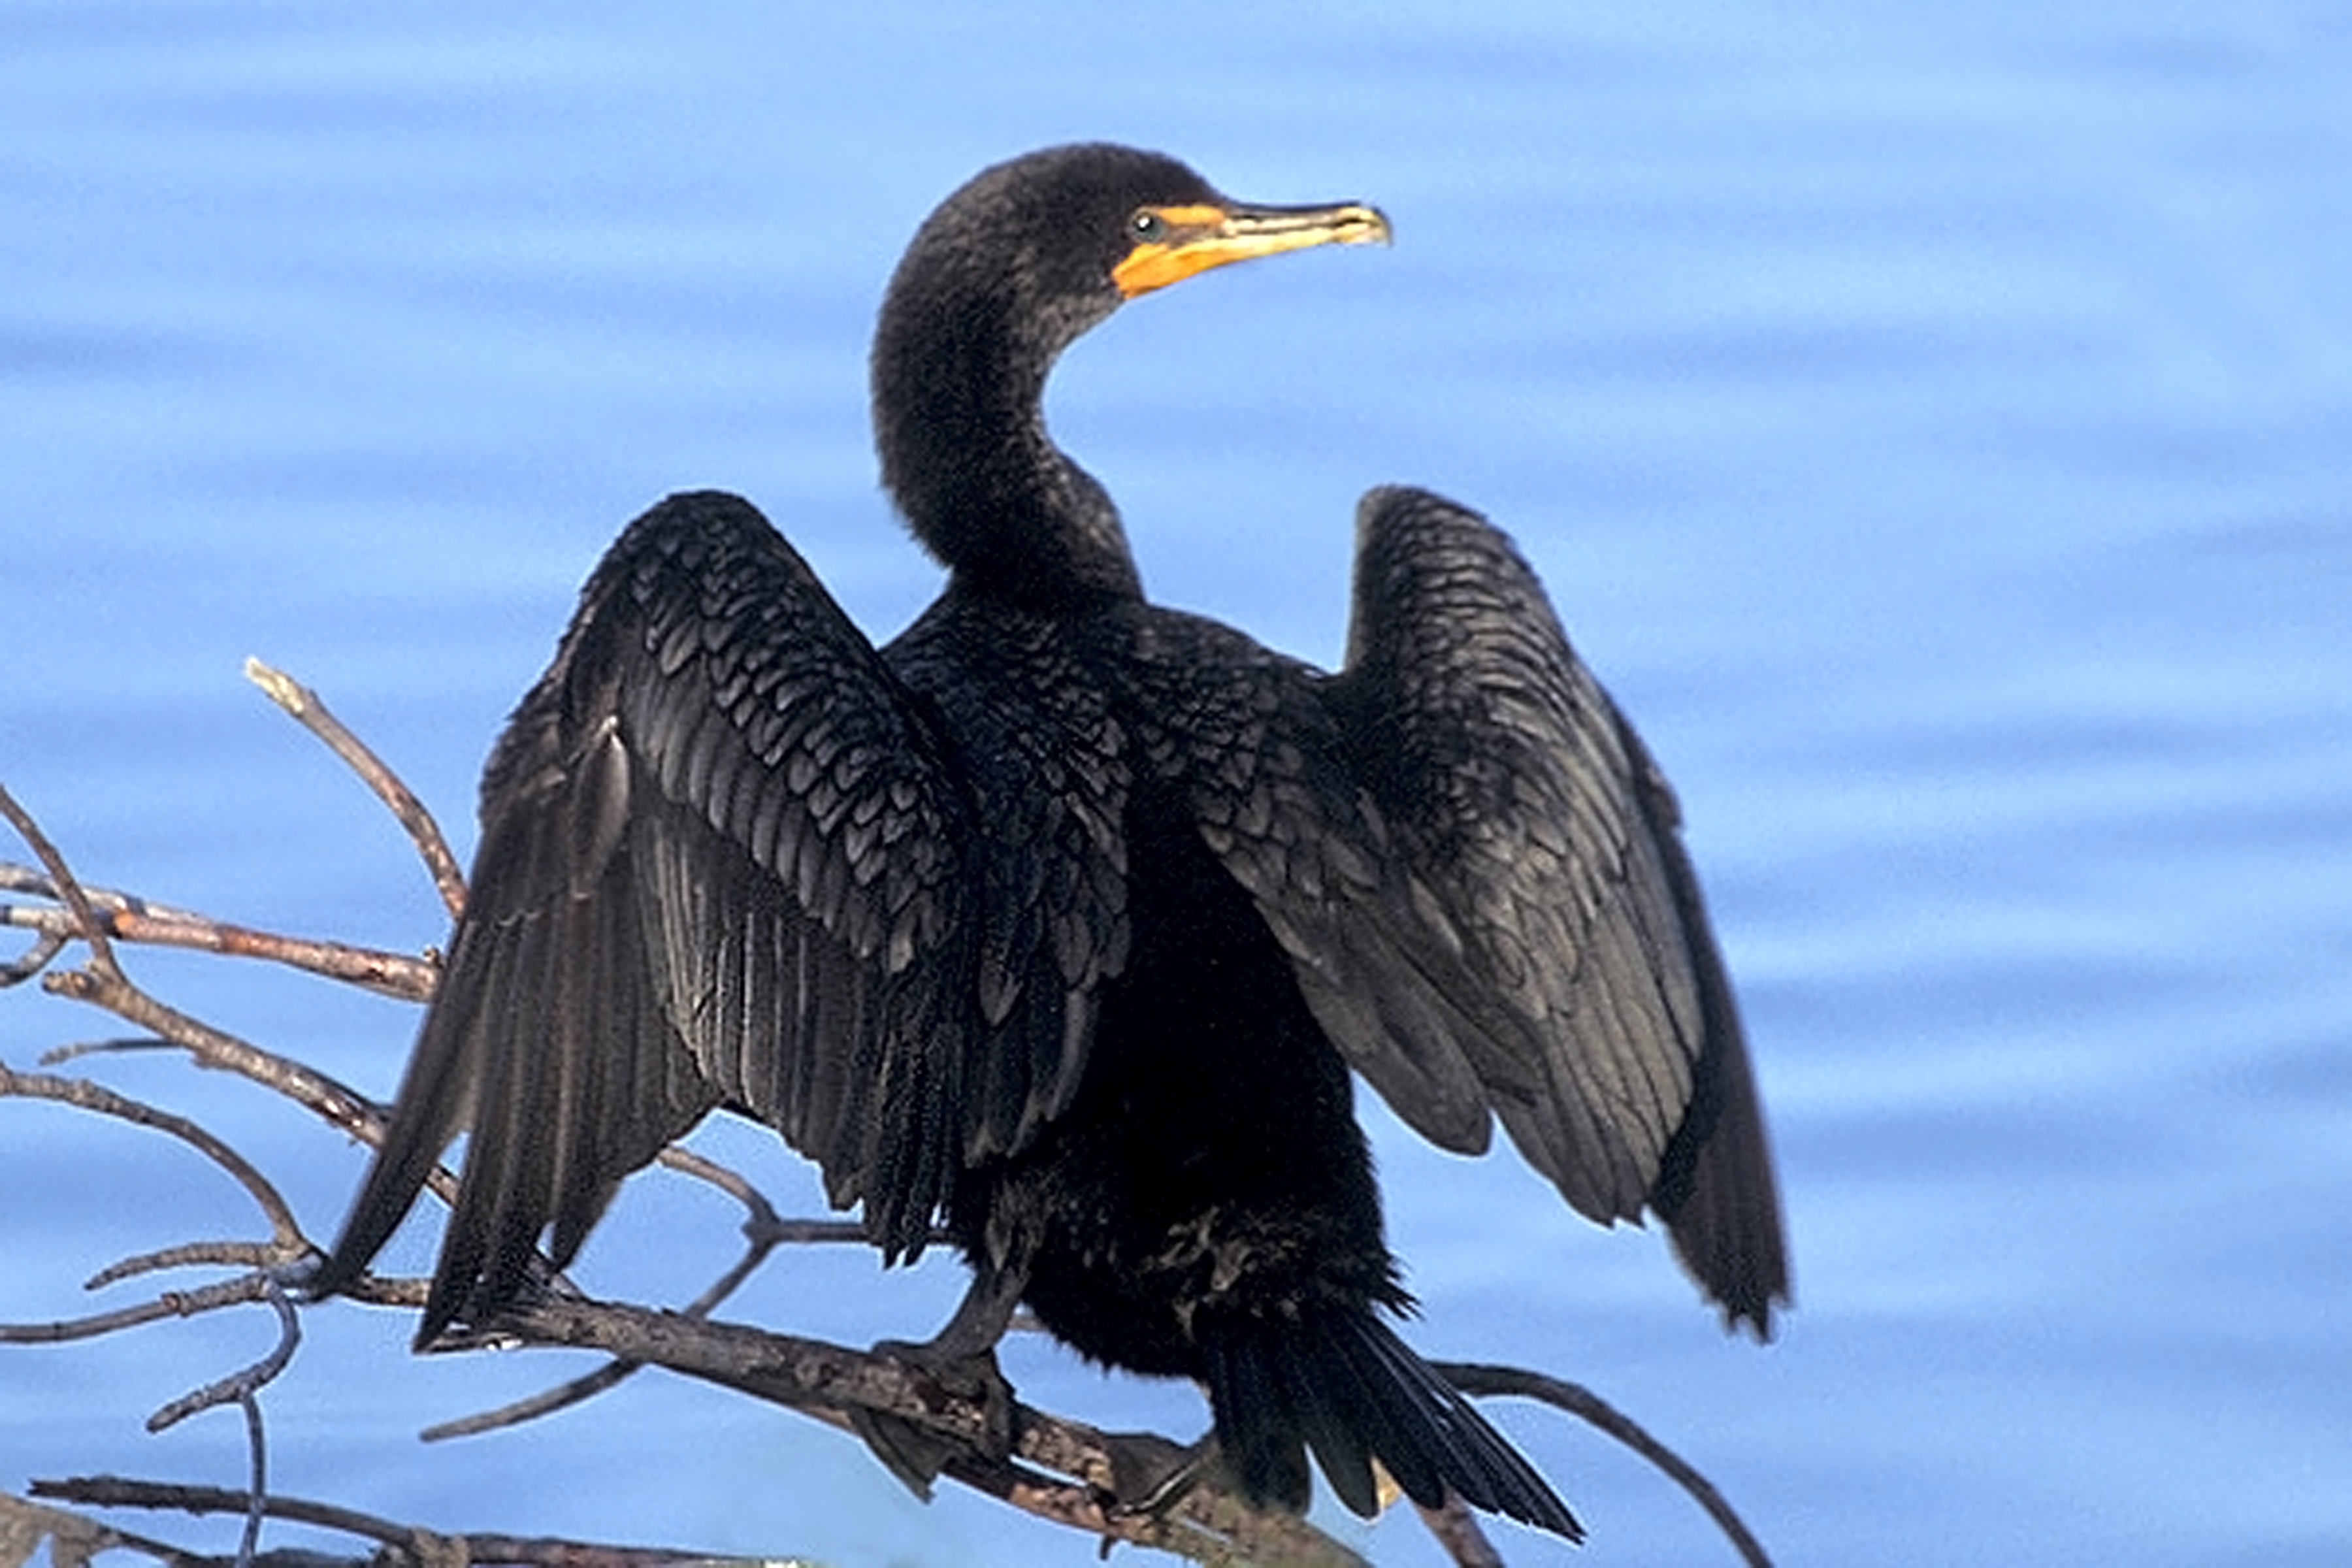 File:Double-crested Cormorant at Ding Darling NWR.jpg - Wikimedia ...